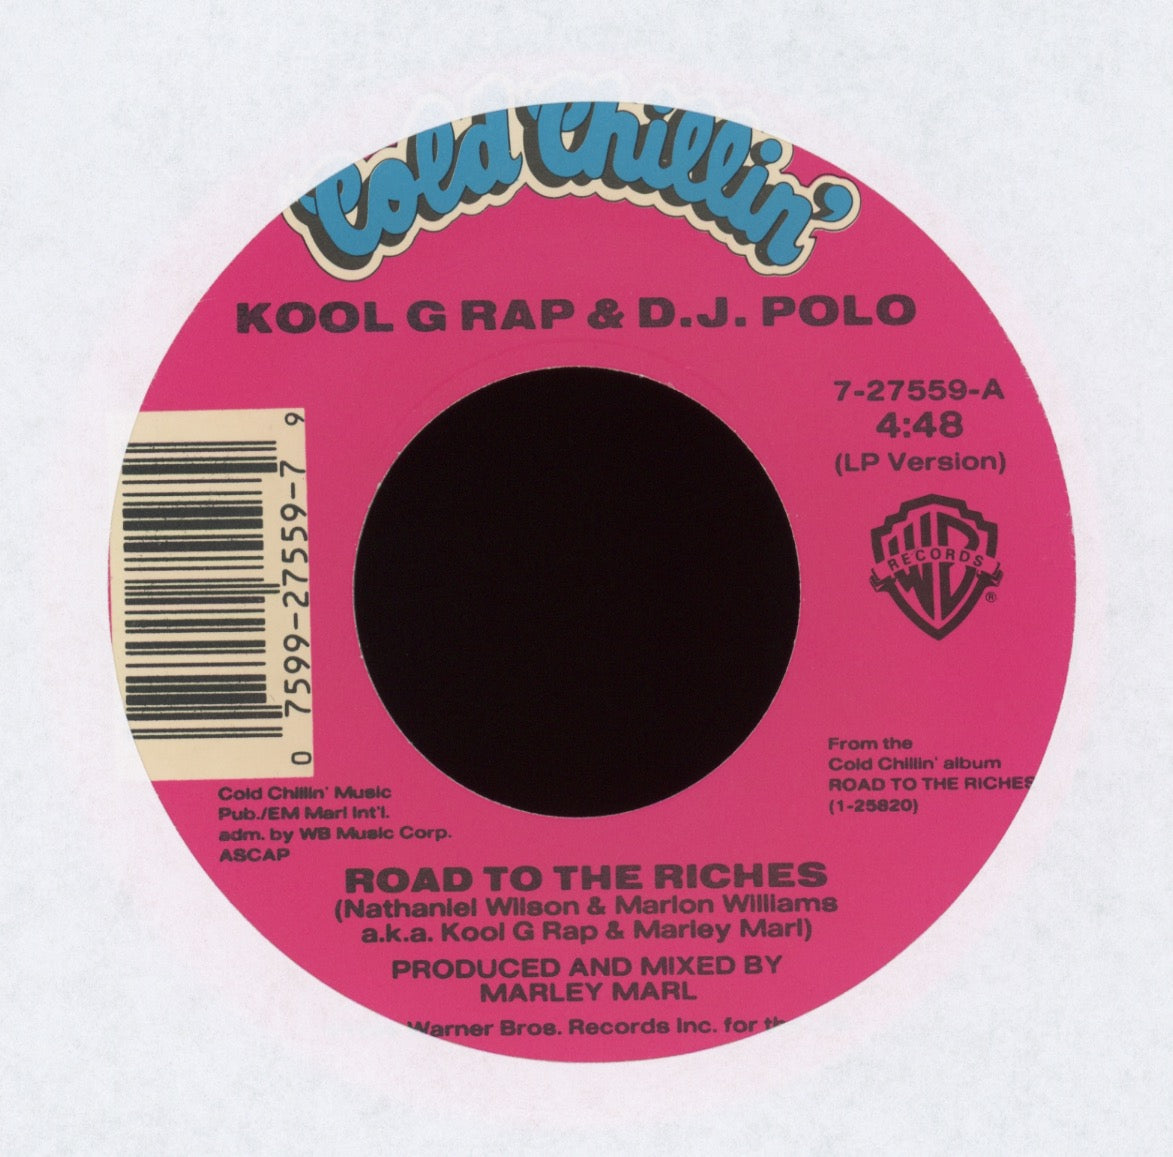 Kool G Rap & D.J. Polo - Road To The Riches on Cold Chillin' With Picture Sleeve